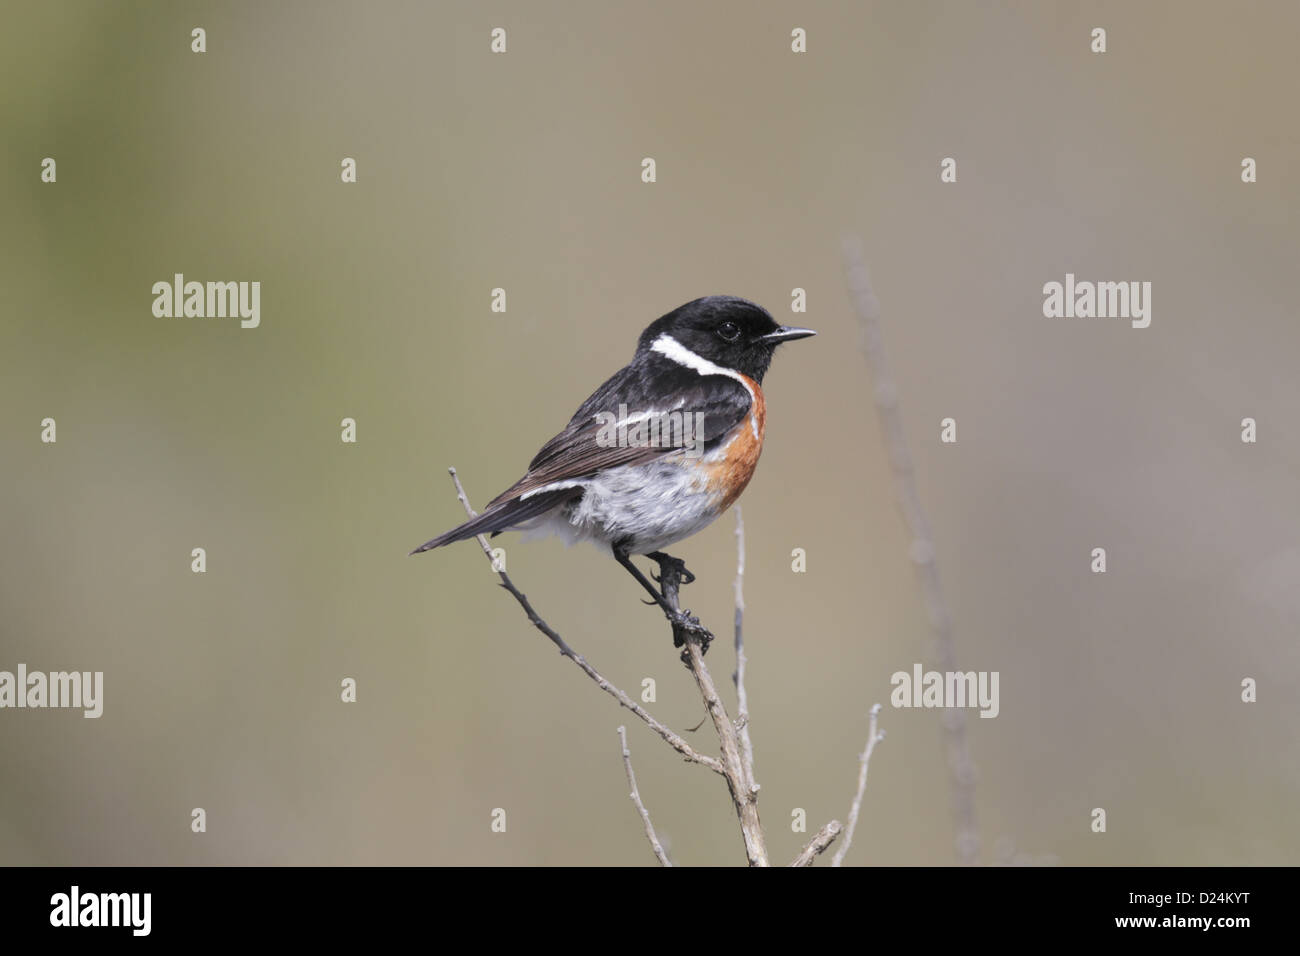 African Stonechat (Saxicola torquatus) adult male, perched on stem, Bontebok N.P., Western Cape, South Africa, September Stock Photo